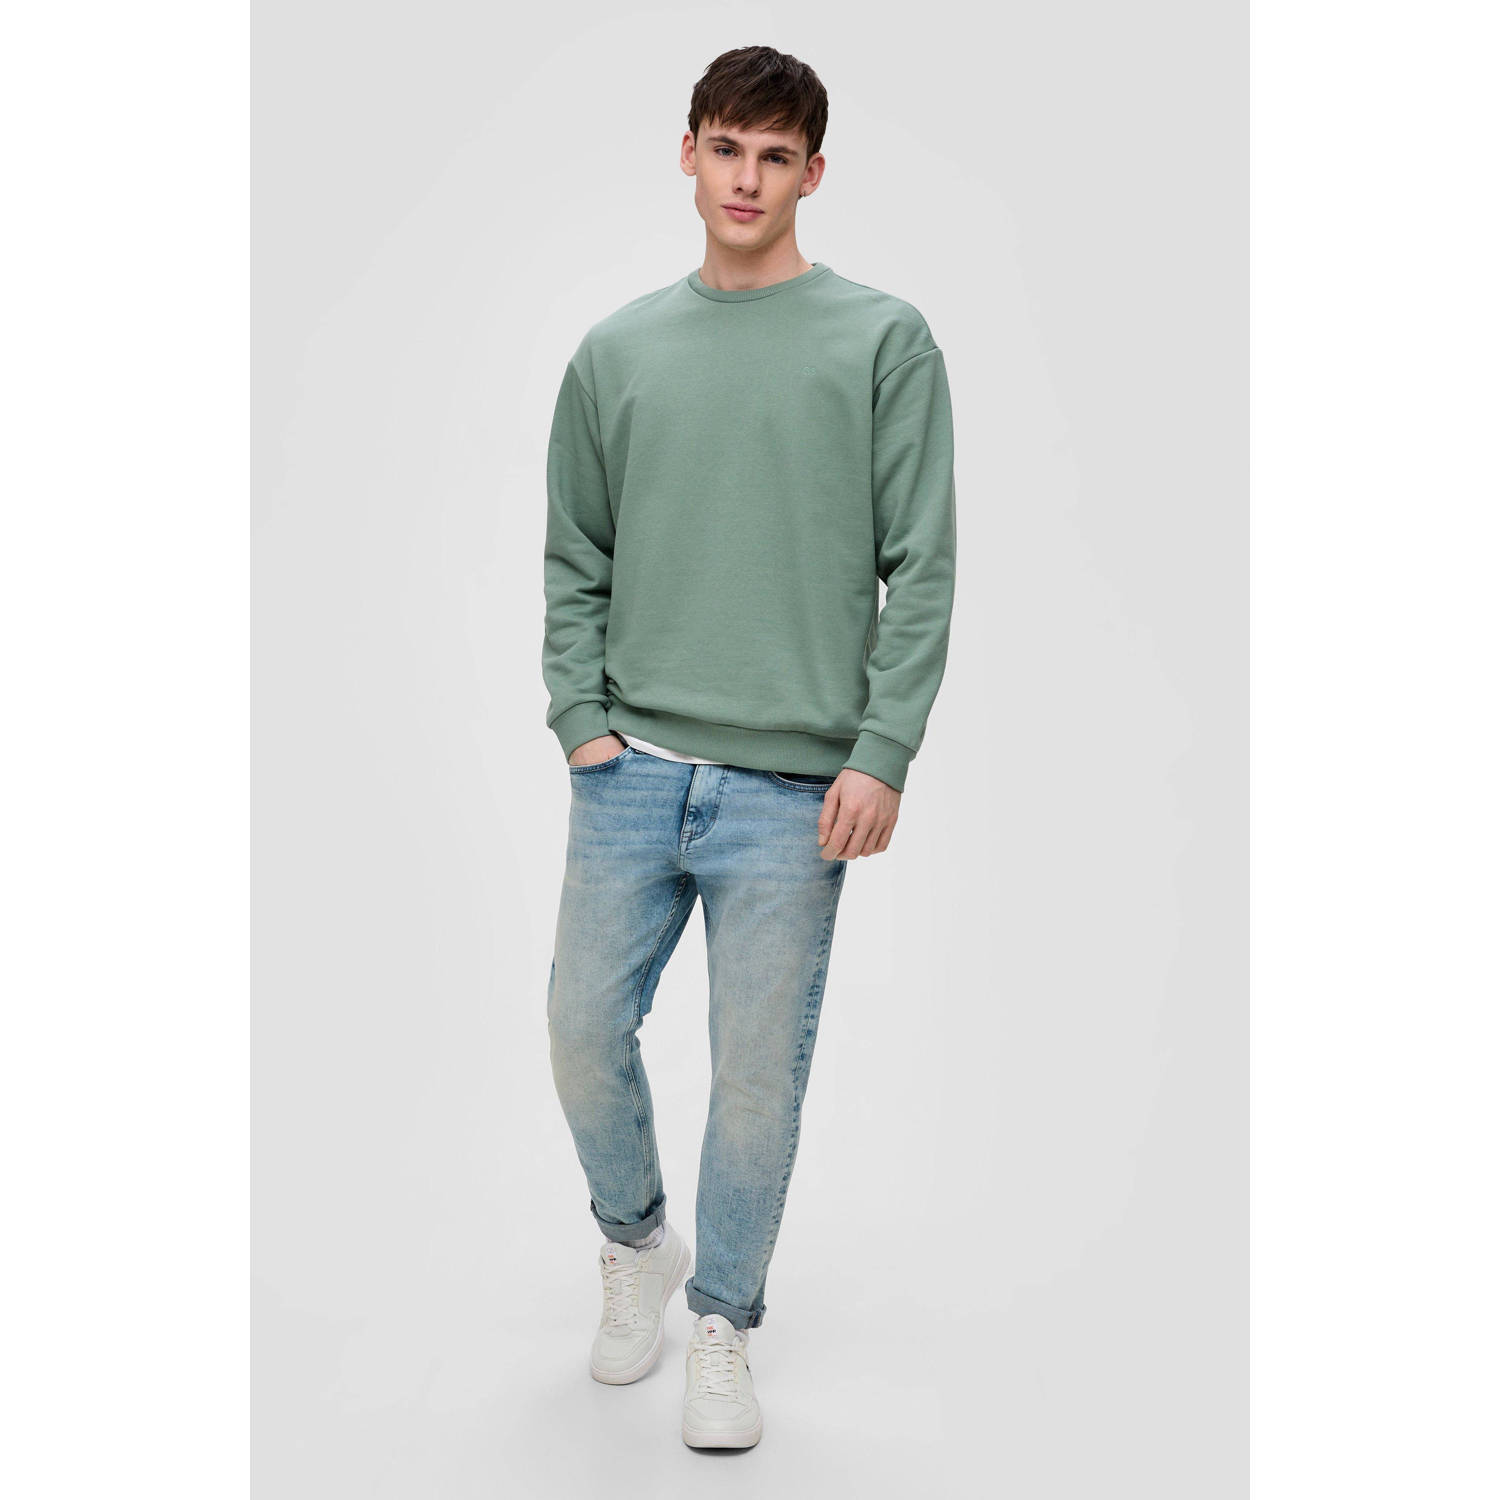 Q S by s.Oliver sweater groen